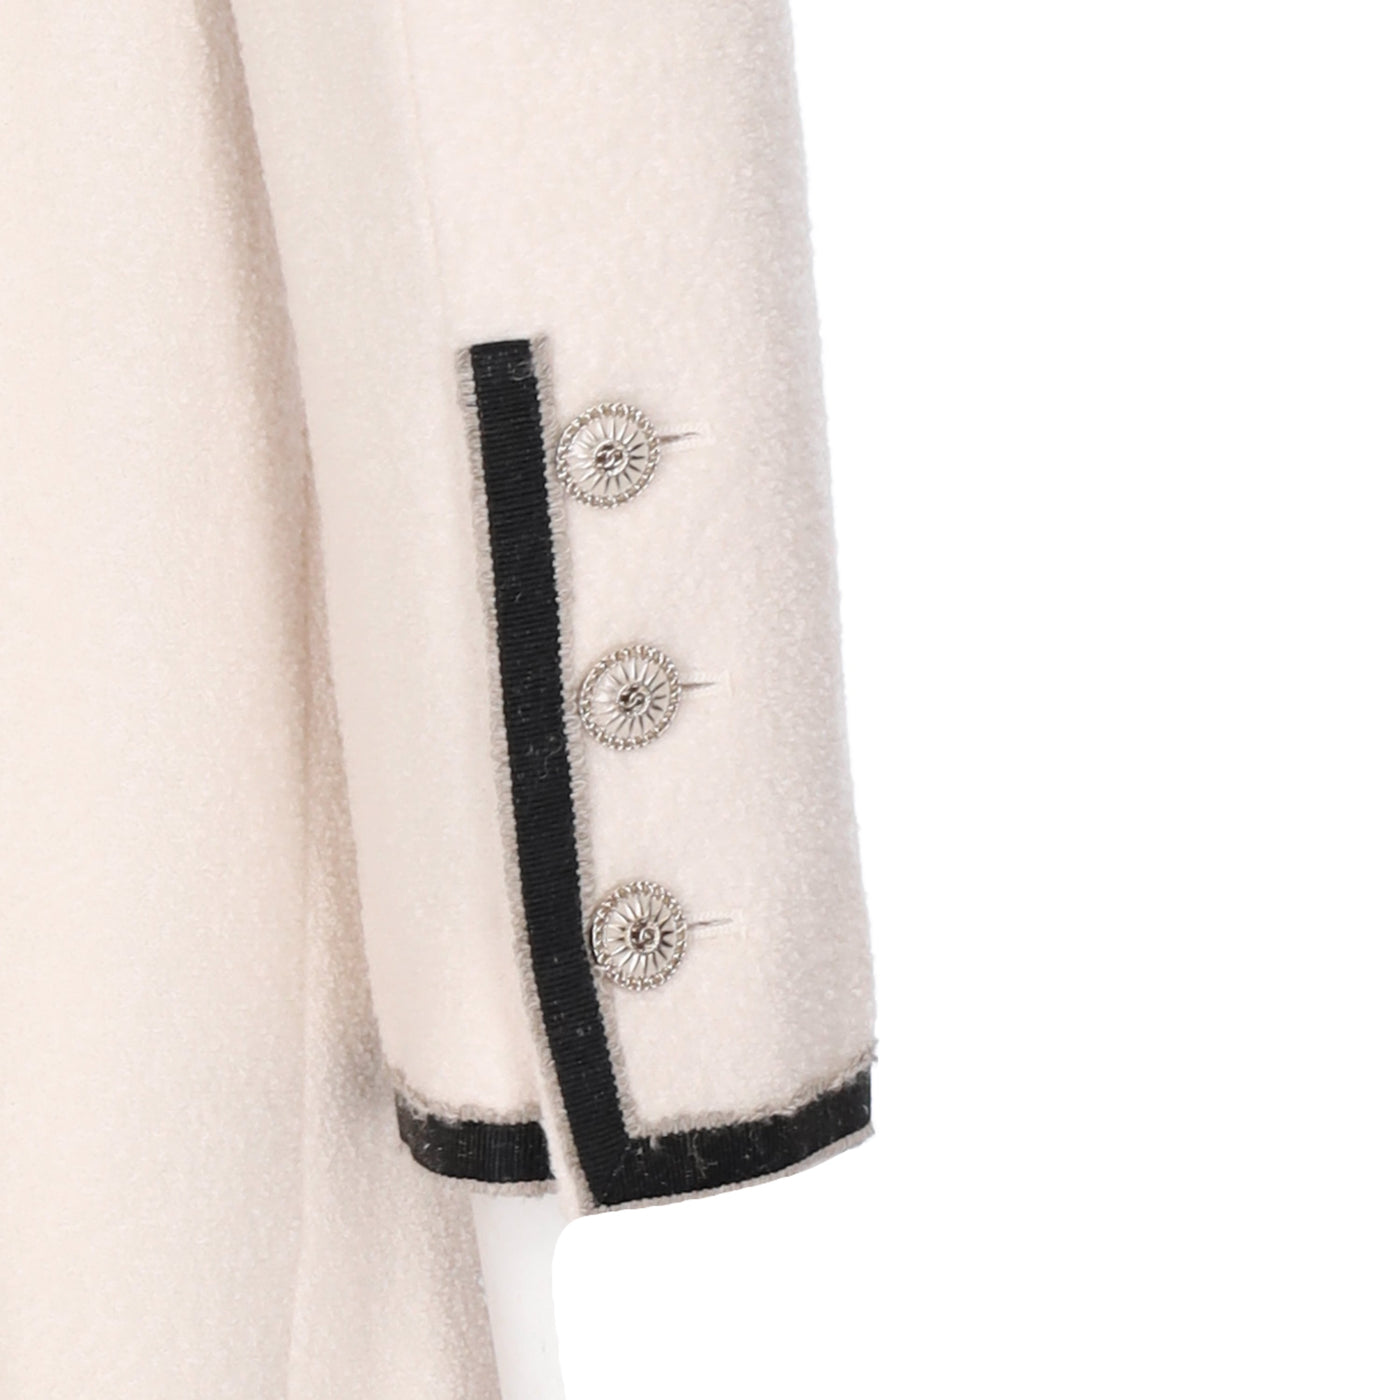 Secondhand Chanel High Neck Wool Coat